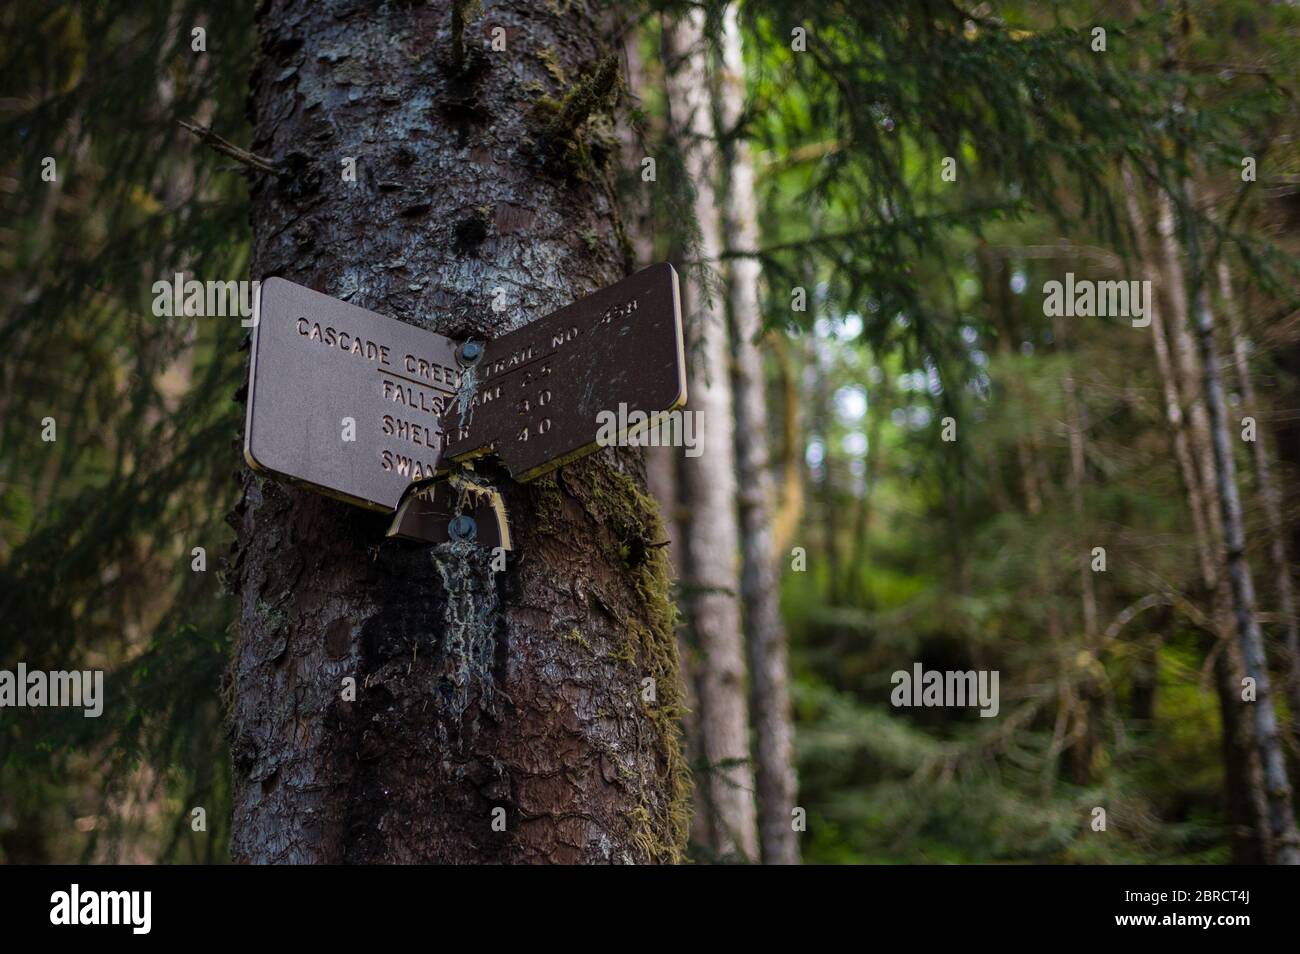 A broken forest service sign on temperate rainforest tree marks Cascade Creek Trail, Thomas Bay, Southeast Alaska, USA, Tongass National Forest Stock Photo